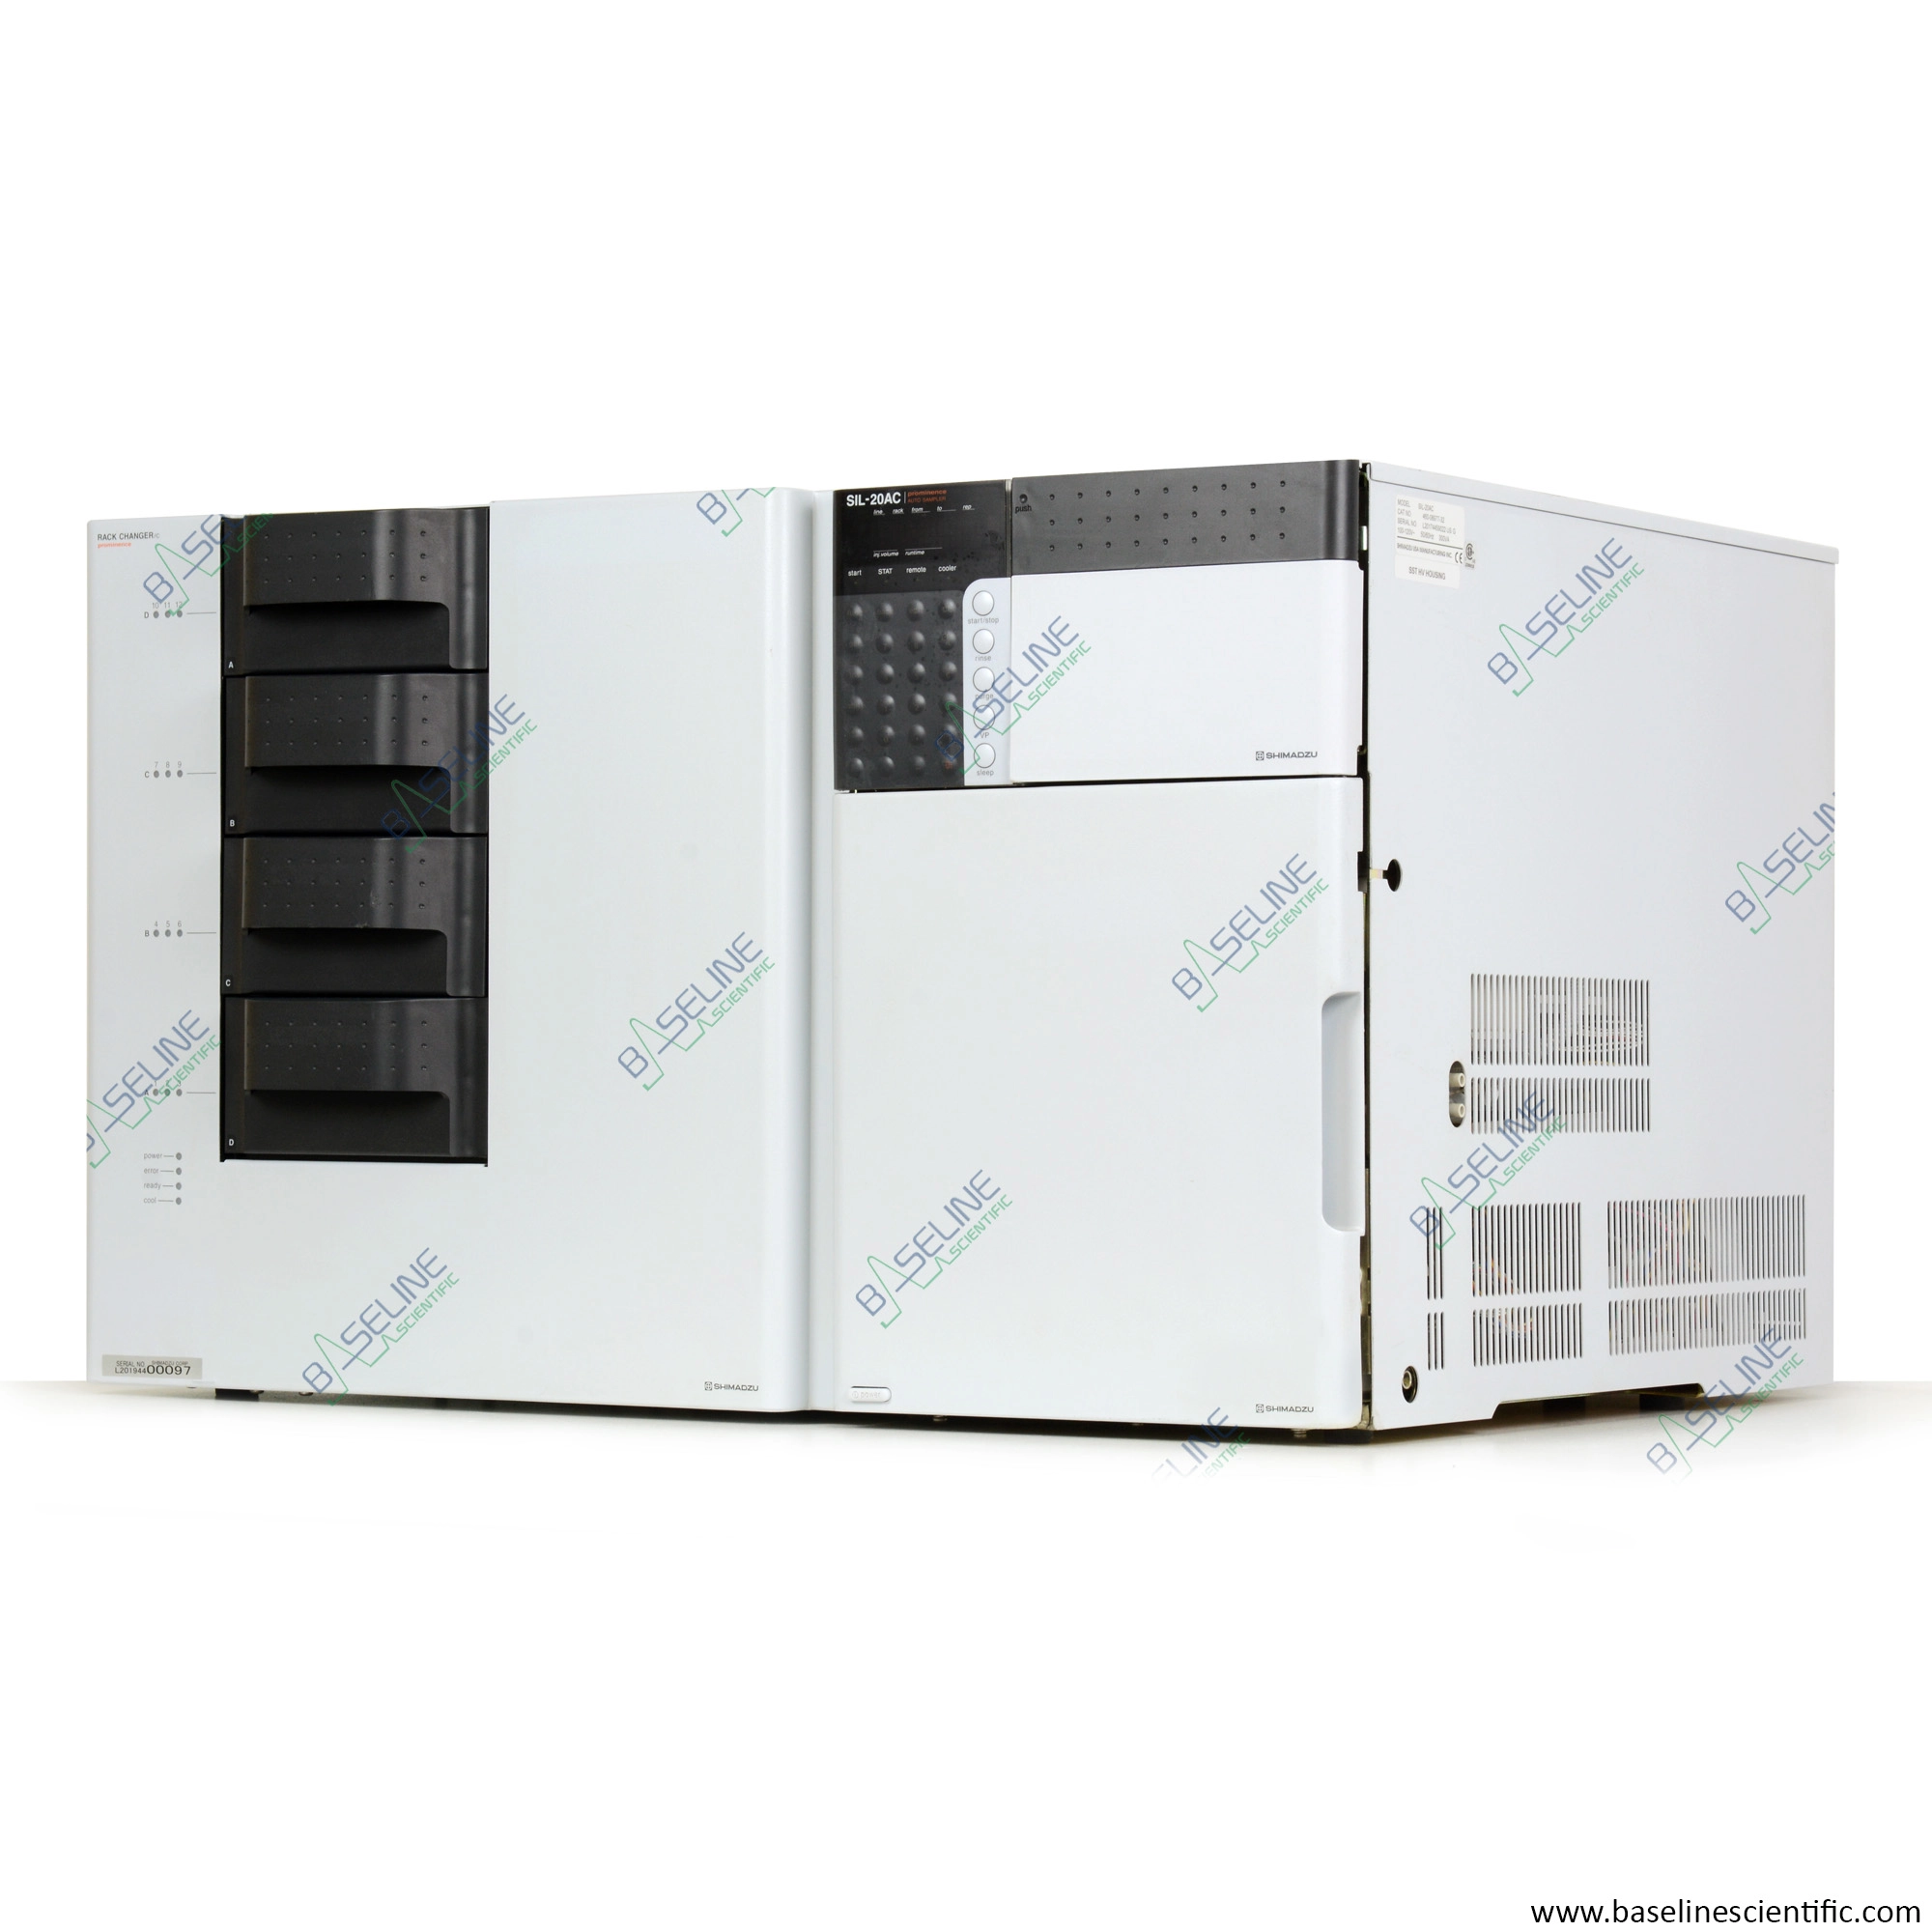 Shimadzu SIL-20AC Prominence UFLC Autosampler and Rack Changer with ONE YEAR WARRANTY